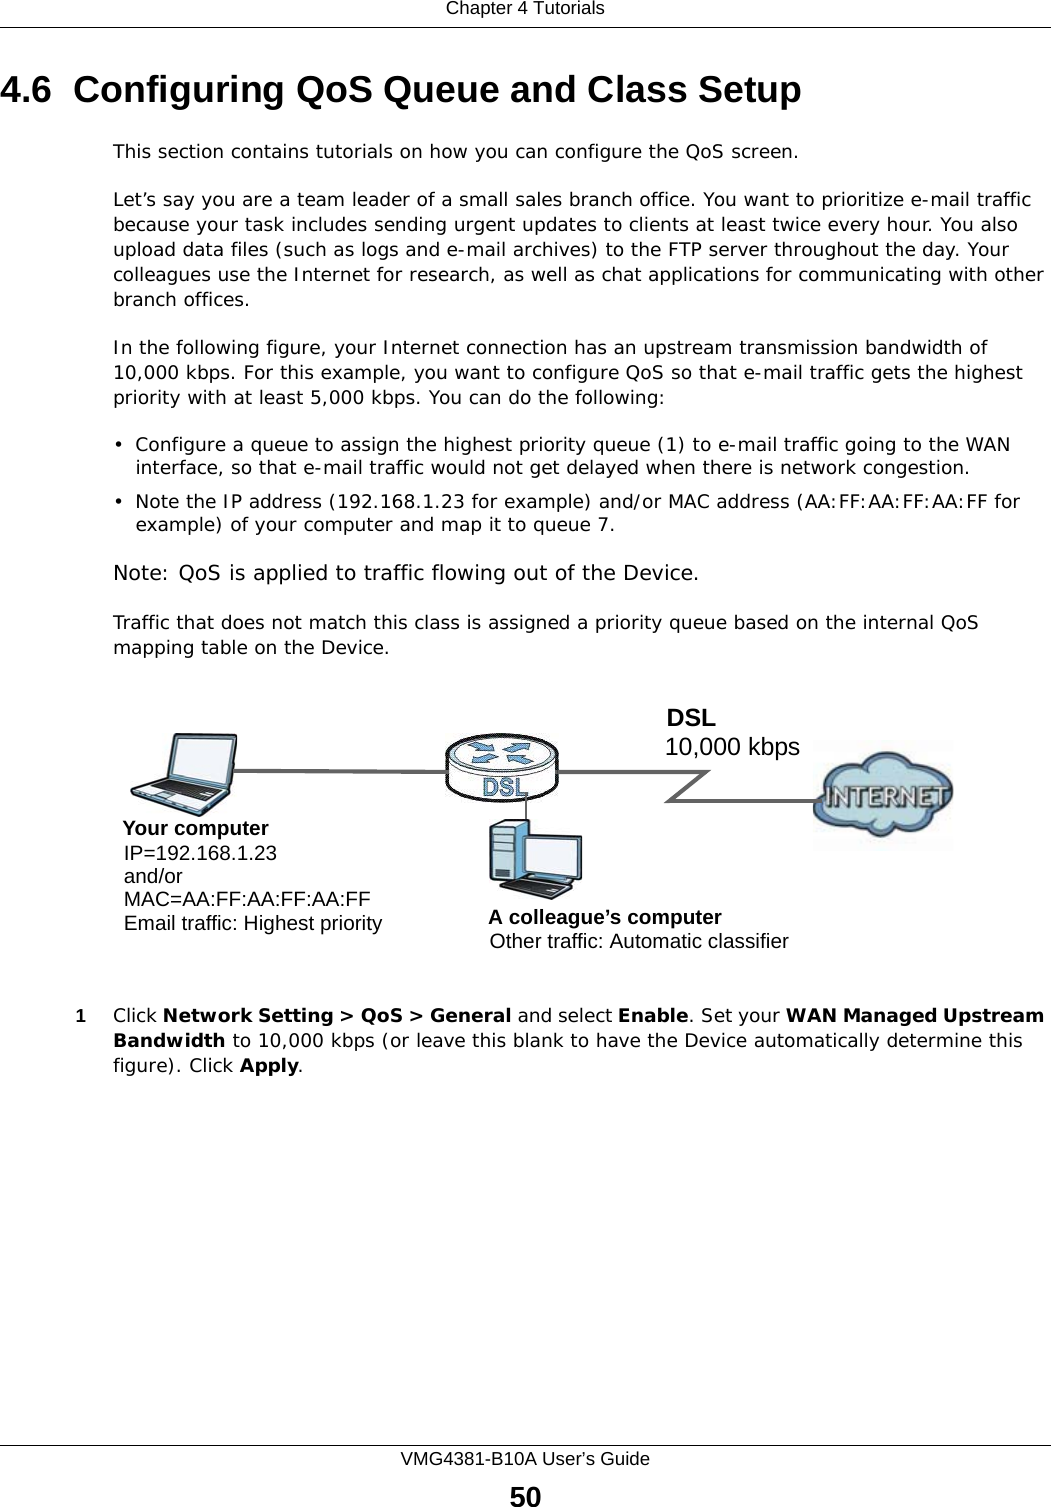 Chapter 4 TutorialsVMG4381-B10A User’s Guide504.6  Configuring QoS Queue and Class SetupThis section contains tutorials on how you can configure the QoS screen.Let’s say you are a team leader of a small sales branch office. You want to prioritize e-mail traffic because your task includes sending urgent updates to clients at least twice every hour. You also upload data files (such as logs and e-mail archives) to the FTP server throughout the day. Your colleagues use the Internet for research, as well as chat applications for communicating with other branch offices.In the following figure, your Internet connection has an upstream transmission bandwidth of 10,000 kbps. For this example, you want to configure QoS so that e-mail traffic gets the highest priority with at least 5,000 kbps. You can do the following: • Configure a queue to assign the highest priority queue (1) to e-mail traffic going to the WAN interface, so that e-mail traffic would not get delayed when there is network congestion. • Note the IP address (192.168.1.23 for example) and/or MAC address (AA:FF:AA:FF:AA:FF for example) of your computer and map it to queue 7. Note: QoS is applied to traffic flowing out of the Device.Traffic that does not match this class is assigned a priority queue based on the internal QoS mapping table on the Device.QoS Example1Click Network Setting &gt; QoS &gt; General and select Enable. Set your WAN Managed Upstream Bandwidth to 10,000 kbps (or leave this blank to have the Device automatically determine this figure). Click Apply.10,000 kbpsDSLYour computerIP=192.168.1.23A colleague’s computer Other traffic: Automatic classifierand/orMAC=AA:FF:AA:FF:AA:FFEmail traffic: Highest priority